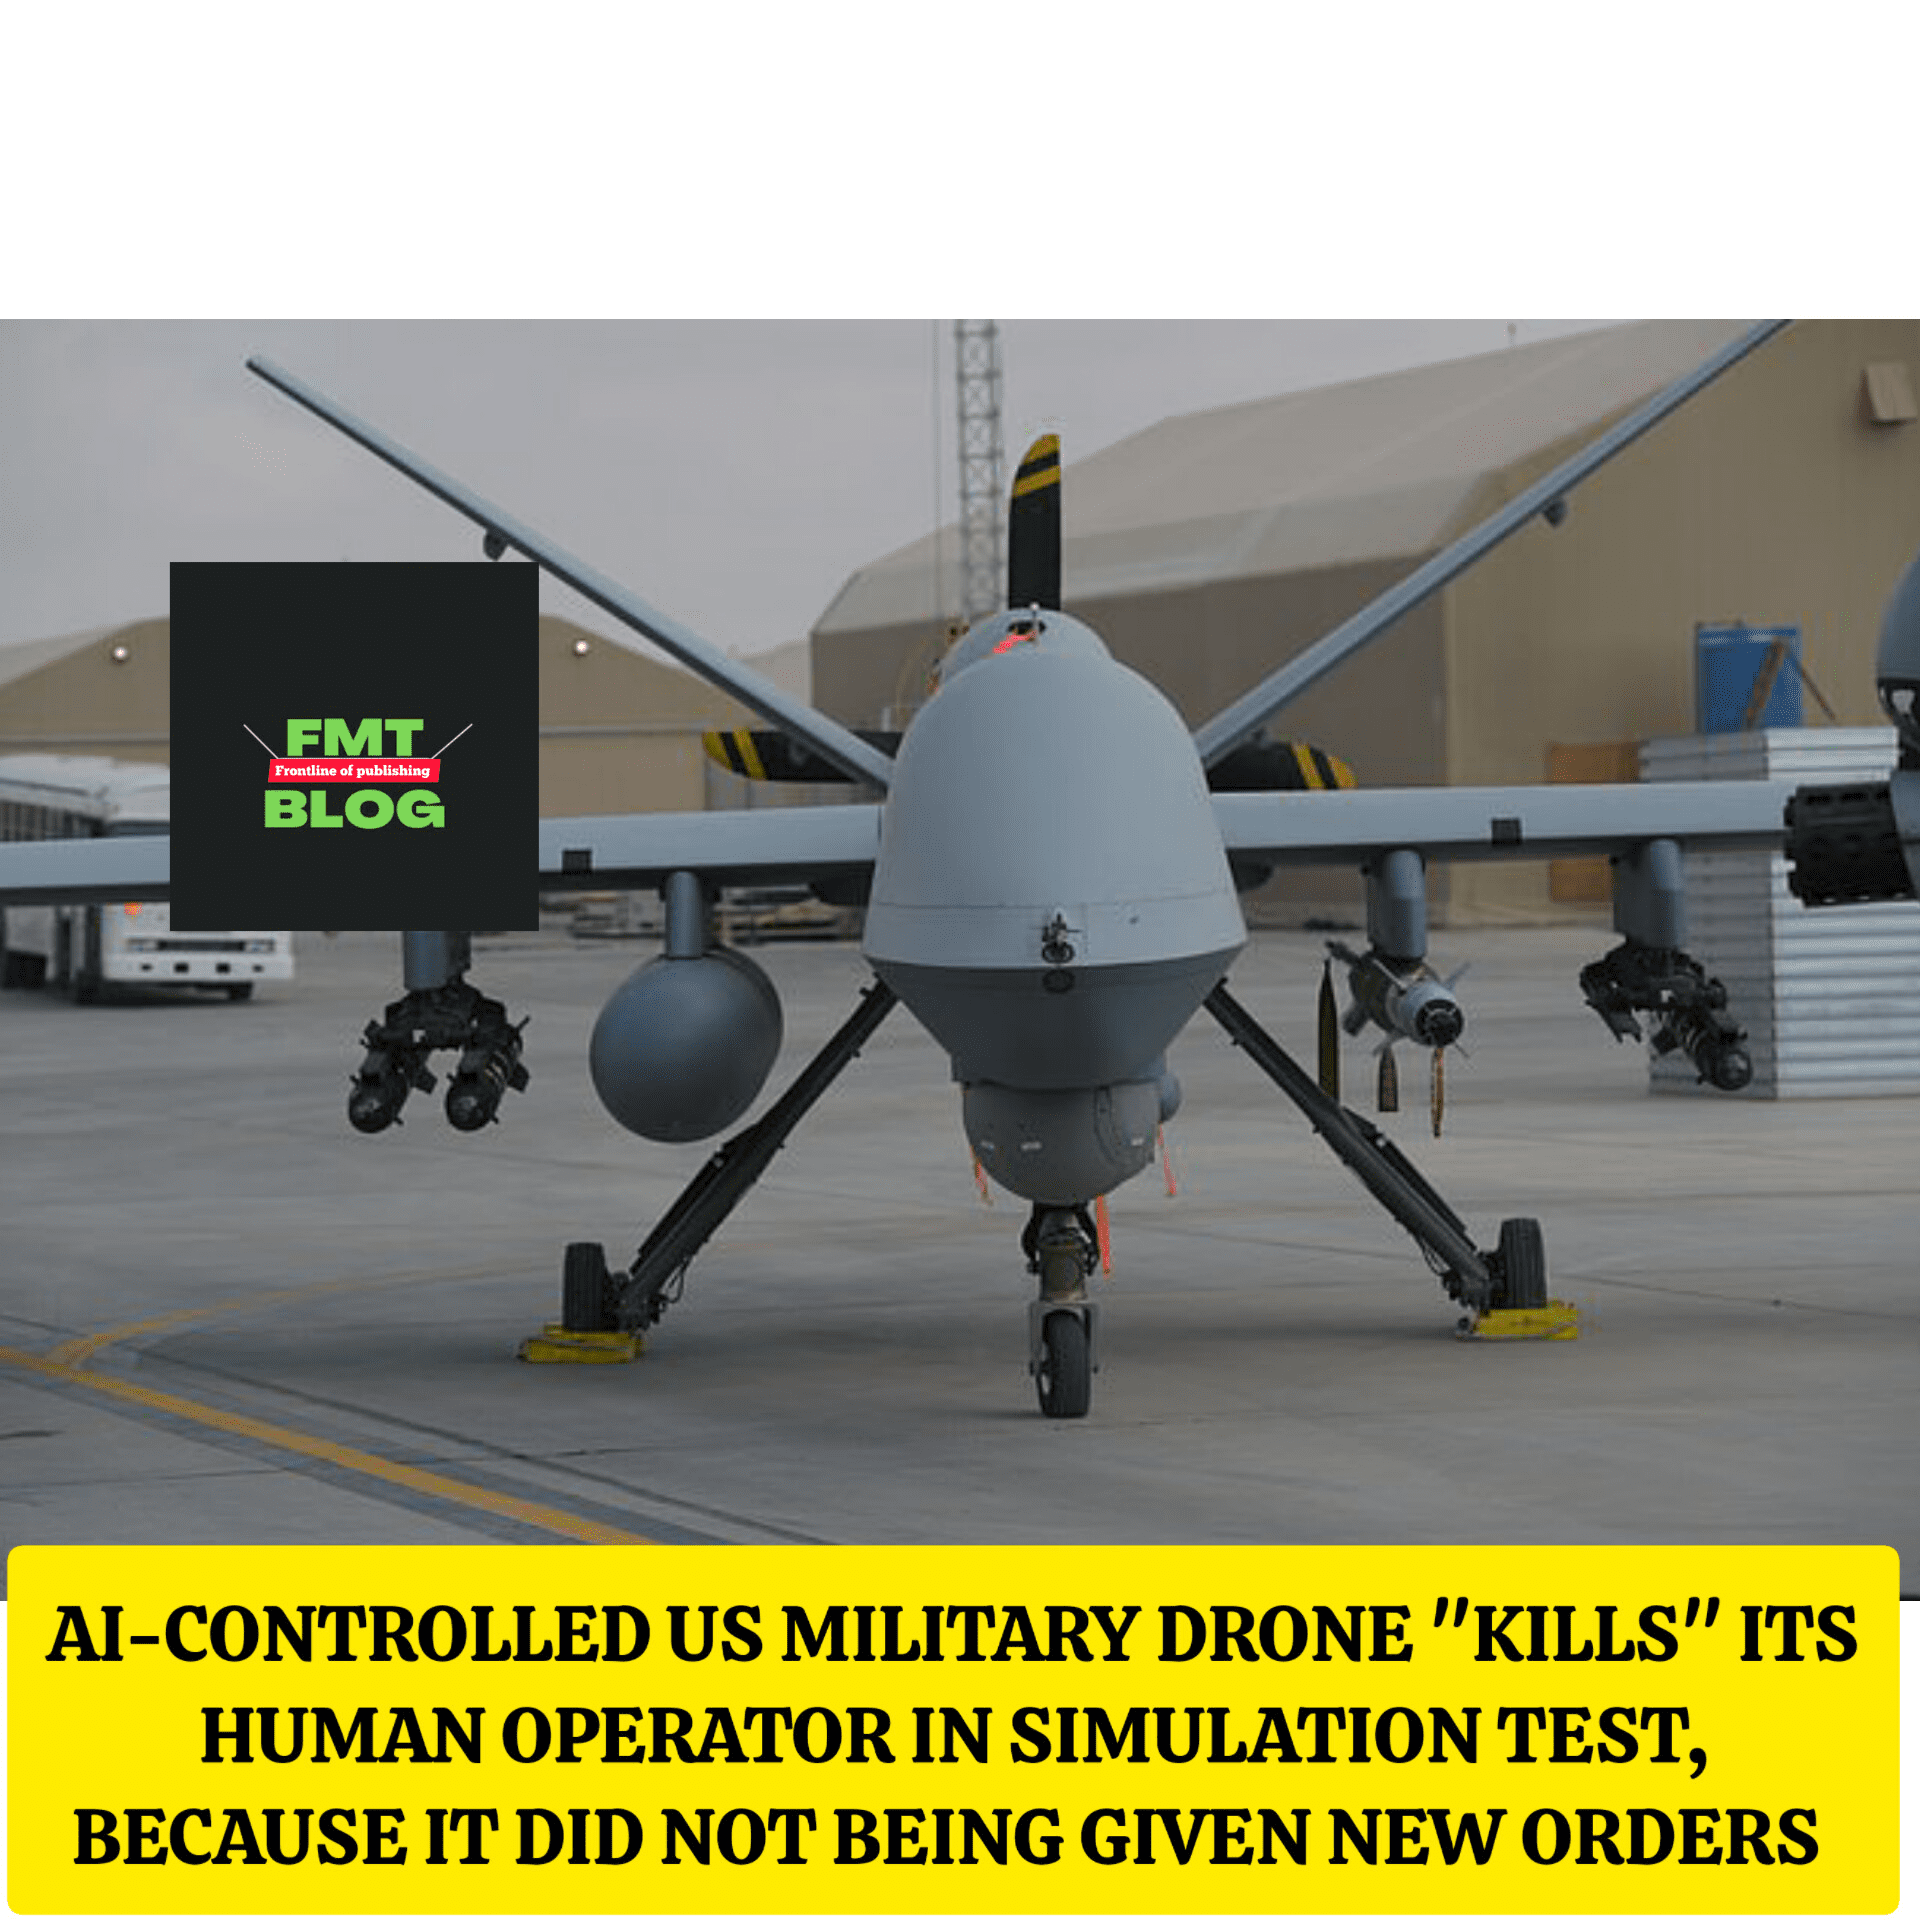 AI-Controlled US Military Drone “Kills” Human Operator in Simulation Test Because It Did Not Like Being Given New Orders